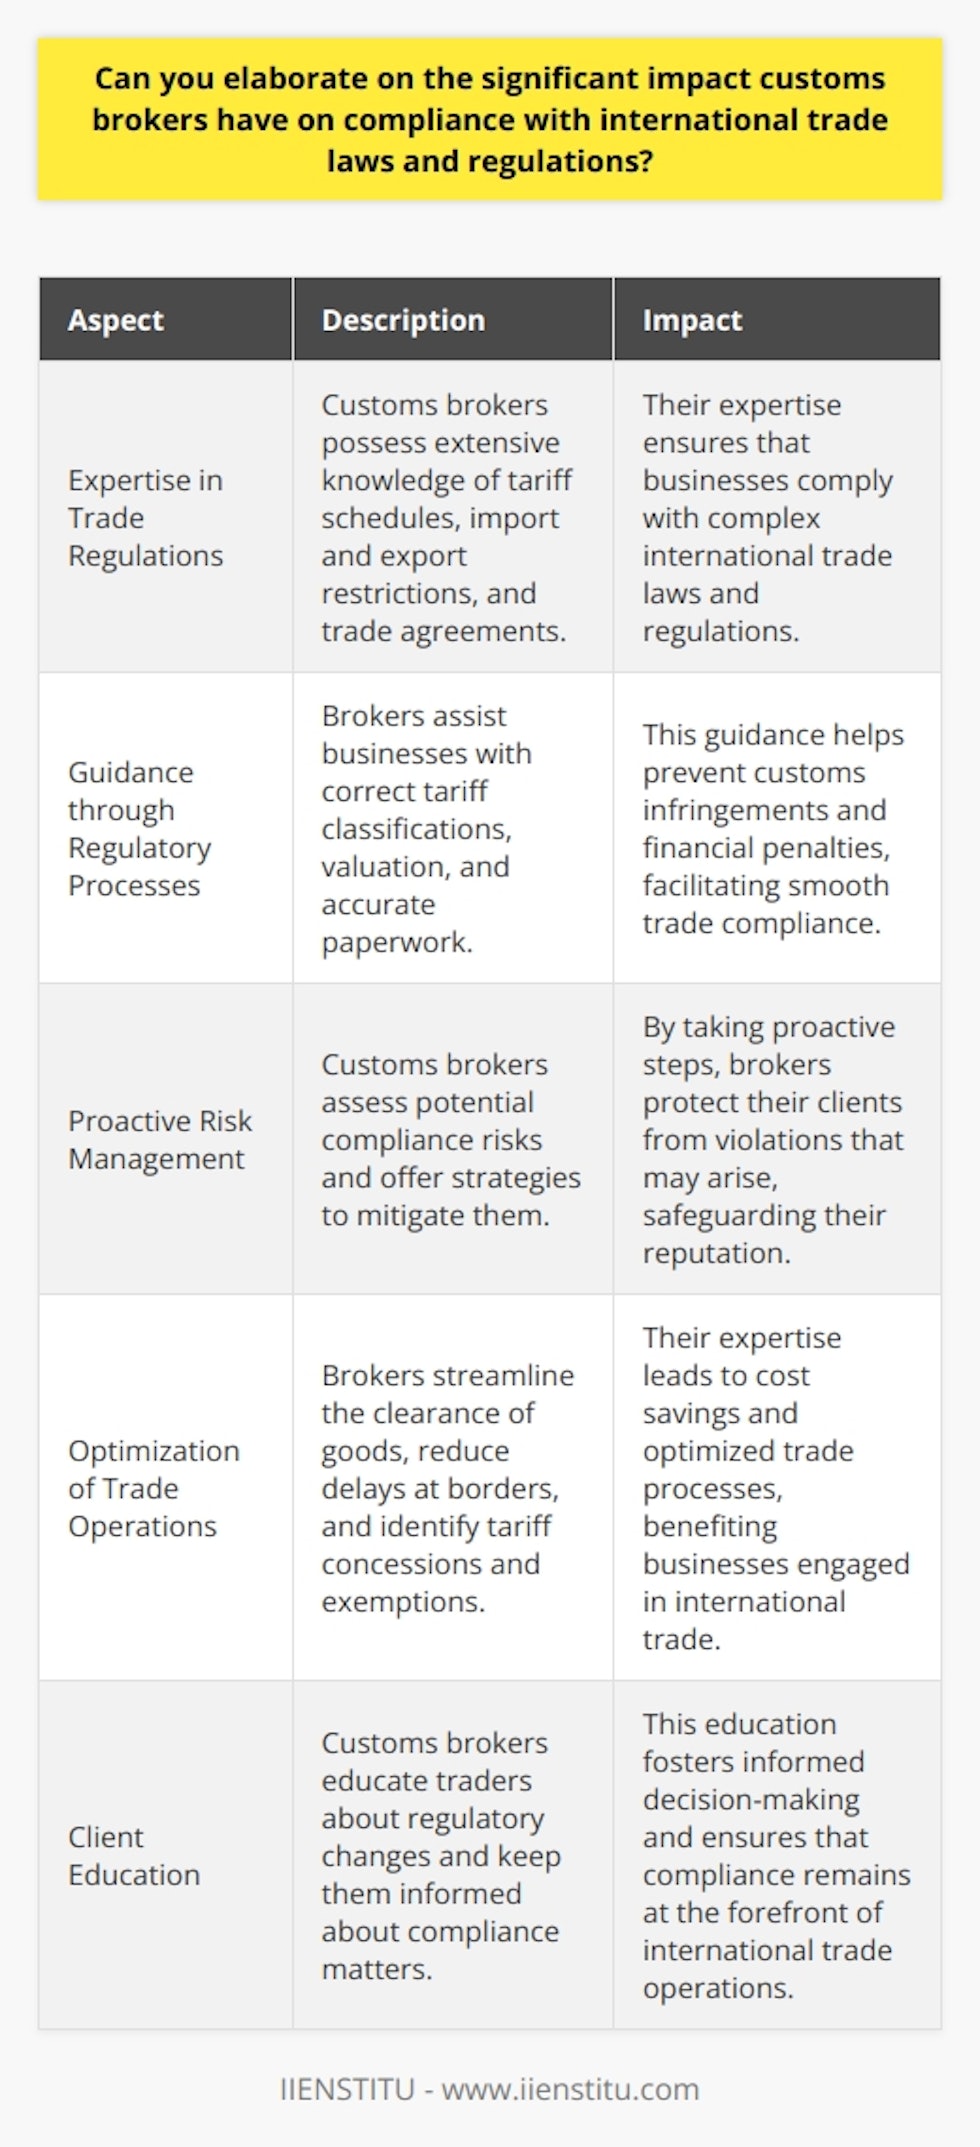 The Role of Customs Brokers Customs brokers serve as critical intermediaries. They navigate complex trade regulations. Their work ensures firms abide by international trade laws. Brokers possess extensive knowledge. This covers tariff schedules, import and export restrictions, and trade agreements. Influence on Compliance They guide businesses through regulatory processes. These include correct tariff classifications and valuation. Accurate paperwork is paramount. It prevents customs infringements and financial penalties. Brokers facilitate trade compliance. They confirm that cargo adheres to legal standards. Proactive Risk Management Brokers assess potential compliance risks. They offer strategies to mitigate such risks. Their proactive steps protect clients. They do so by preventing violations that may arise.  Optimizing Trade Operations Customs brokers optimize trade processes. They streamline the clearance of goods. This reduces delays at borders. Brokers expertise can lead to cost savings. They identify tariff concessions and exemptions. Businesses often rely on these insights. Educating Clients Customs brokers educate traders. They help them understand regulatory changes. Brokers keep clients informed. This fosters informed decision-making. Compliance remains at the forefront due to this.  - Brokers minimize legal violations. - They safeguard a firms reputation. - They ensure seamless international transactions. Conclusion In conclusion, customs brokers hold significant sway. They ensure compliance with trade laws. Their impact cannot be overstated. They serve as an invaluable resource. Their role helps maintain the integrity of international trade operations.